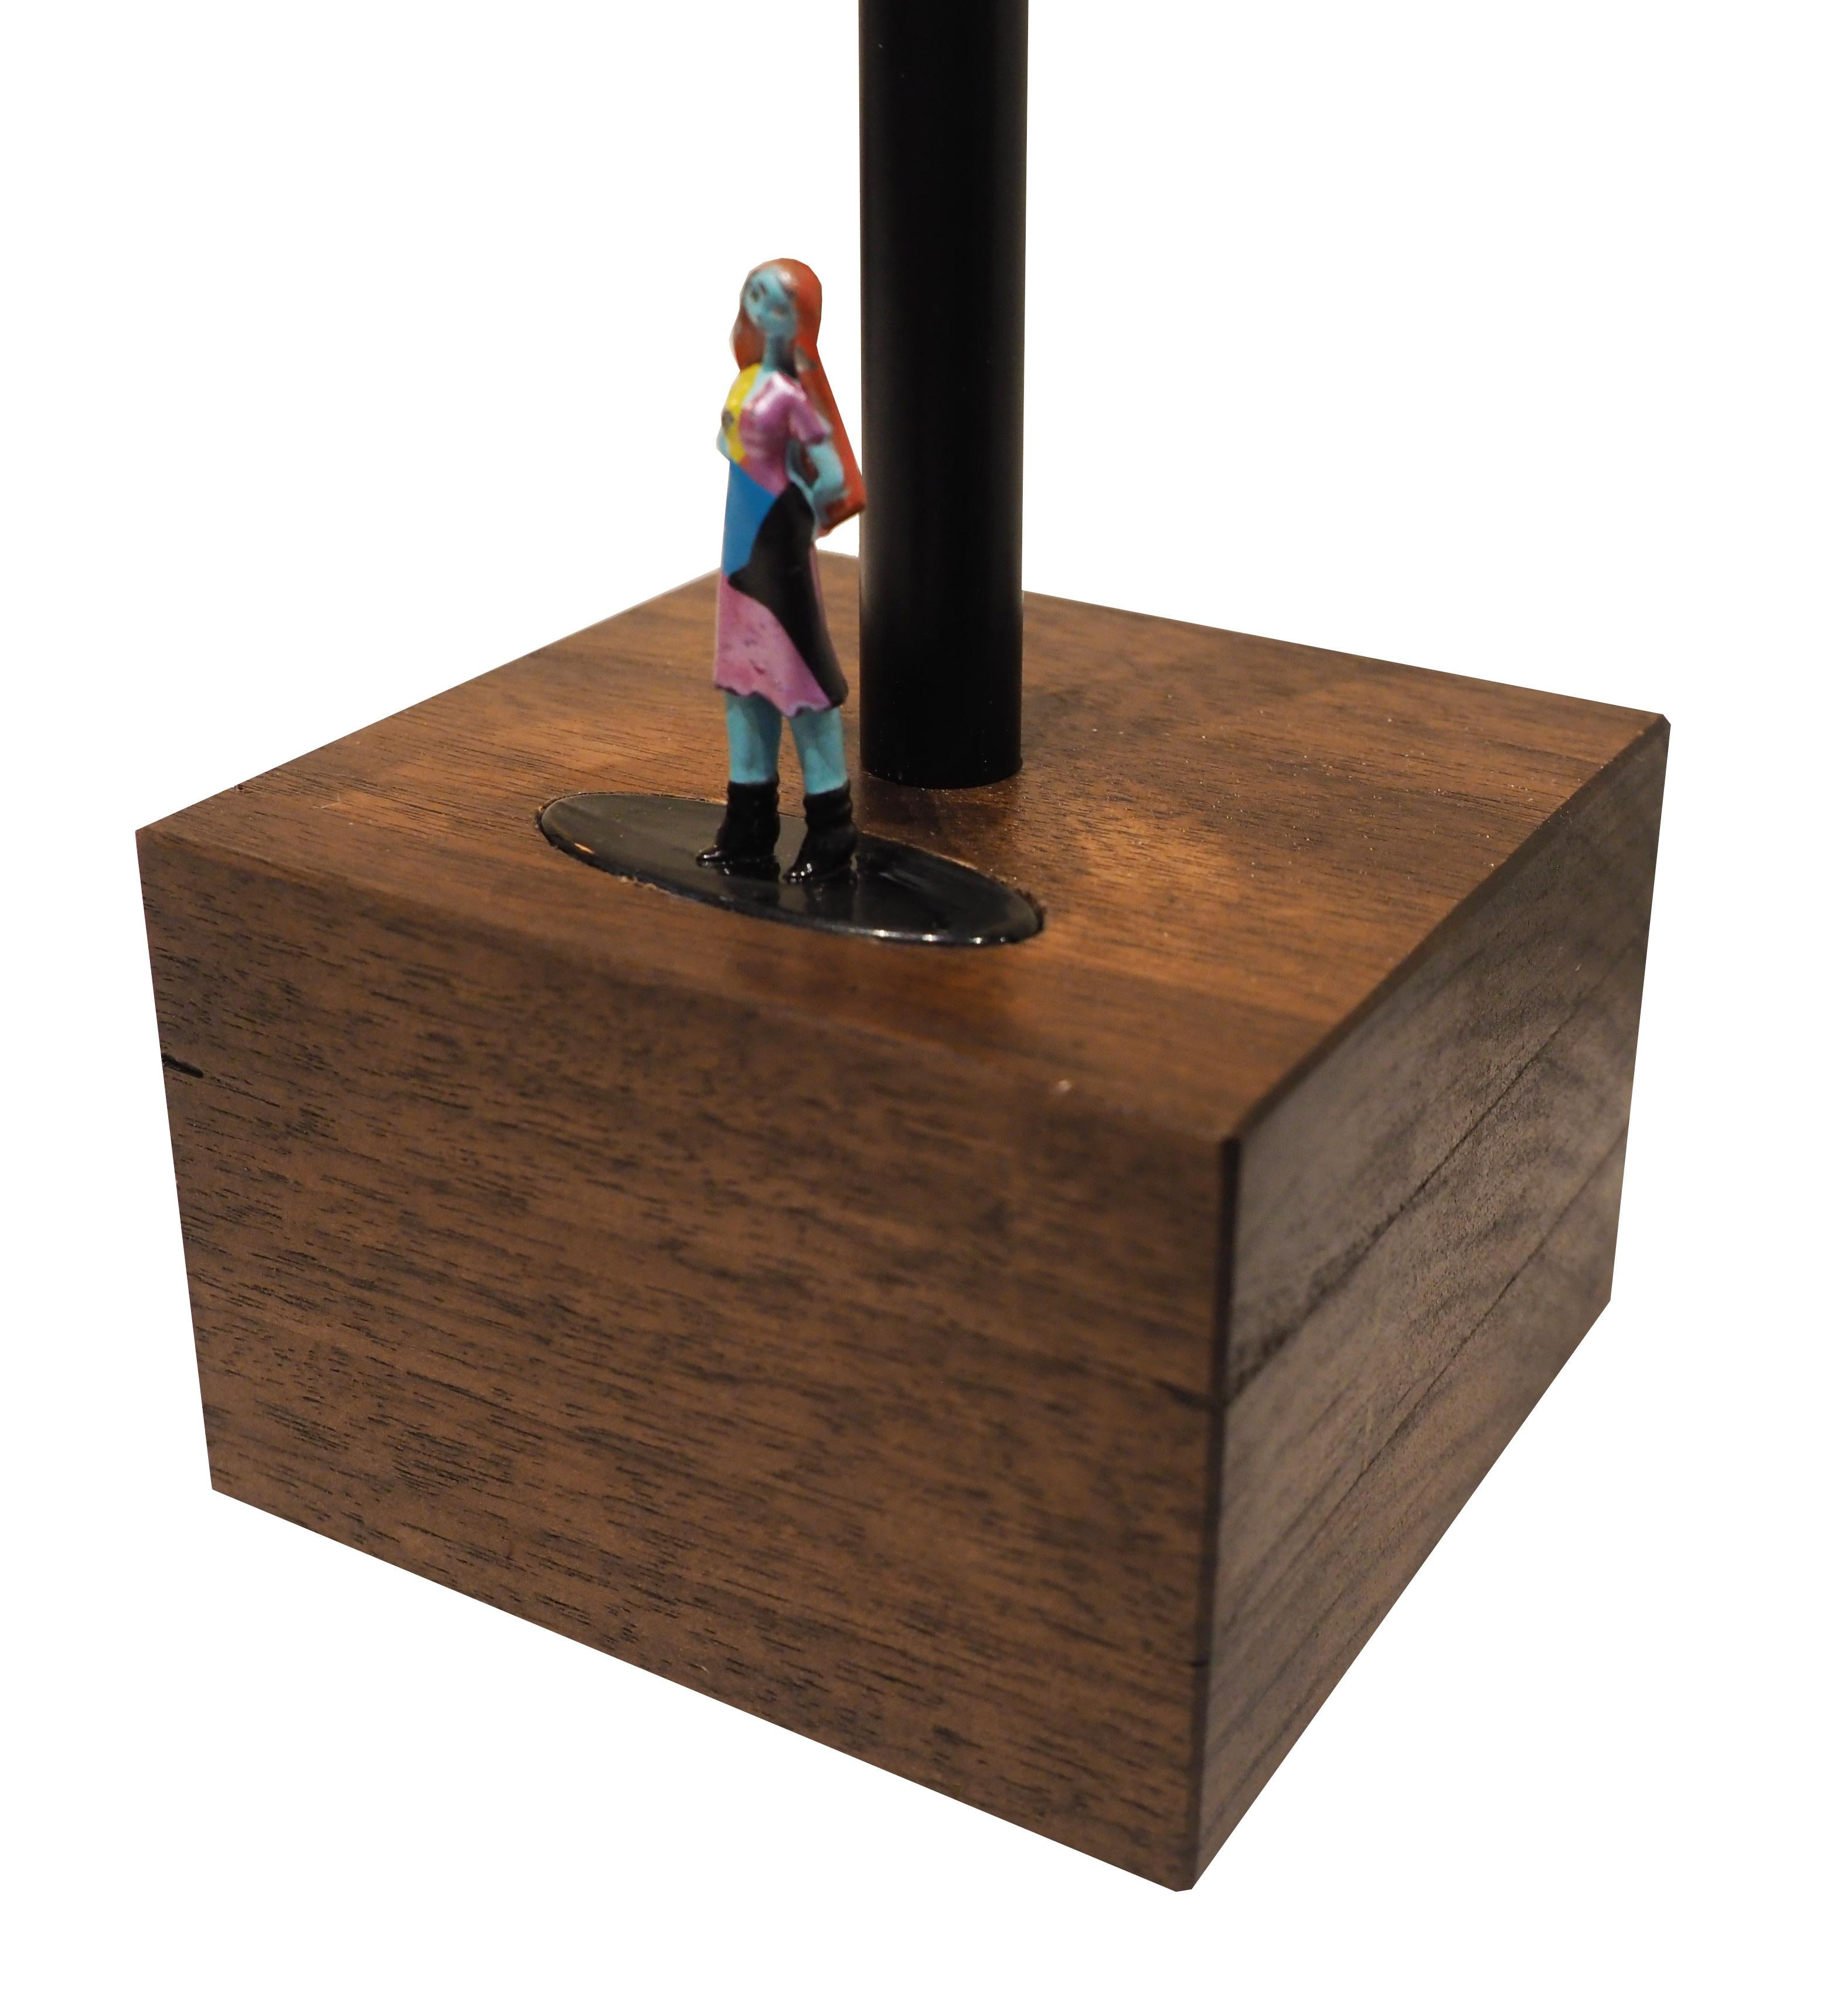 Limited set of touch lamps features a handcrafted hardwood base (walnut, poplar, and ash) inlaid with authentic vintage Nightmare Before Christmas die-cast metal figurines. Touch each figurine to adjust to three levels of brightness! 

(40-watt